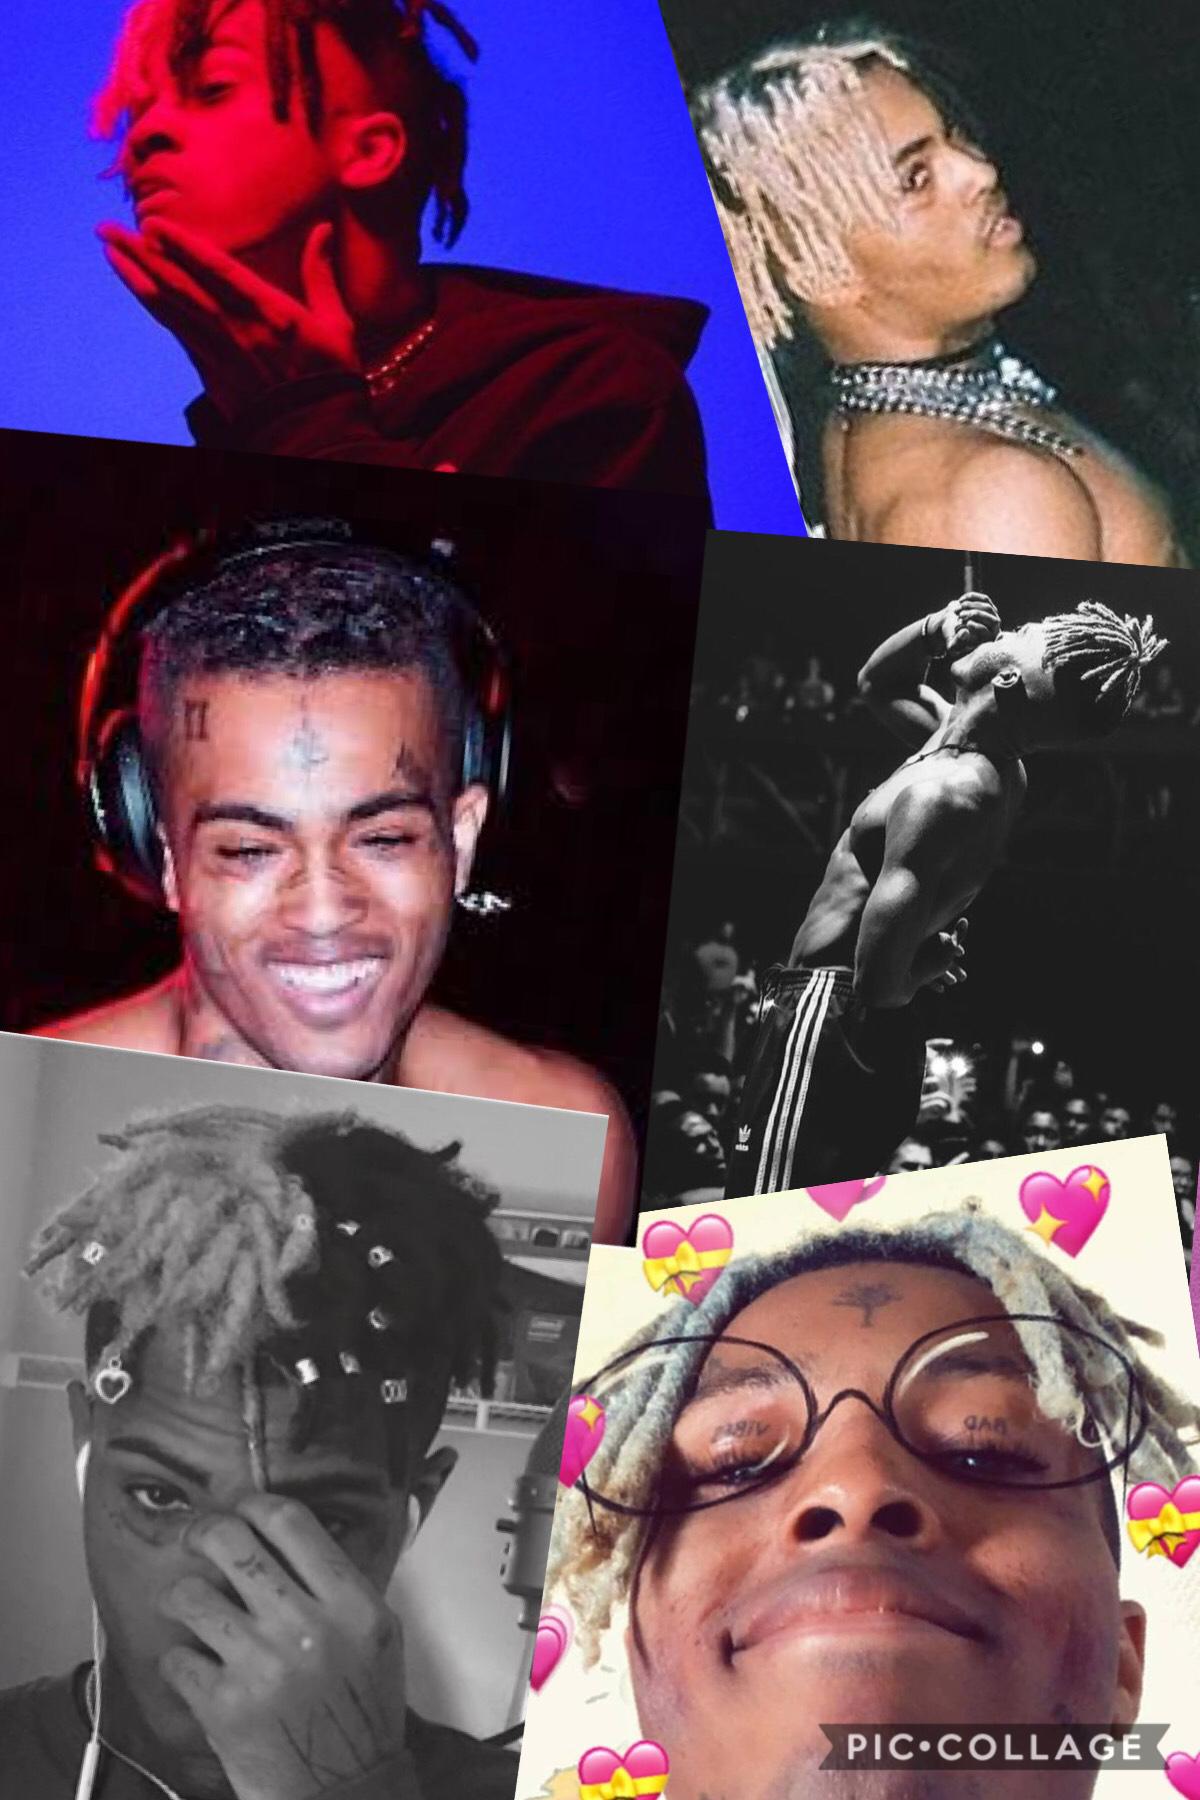 A year without, the day u died I will always love u and never forgot u jahseh💔thank you for everything u have done🙏🏻💕😭